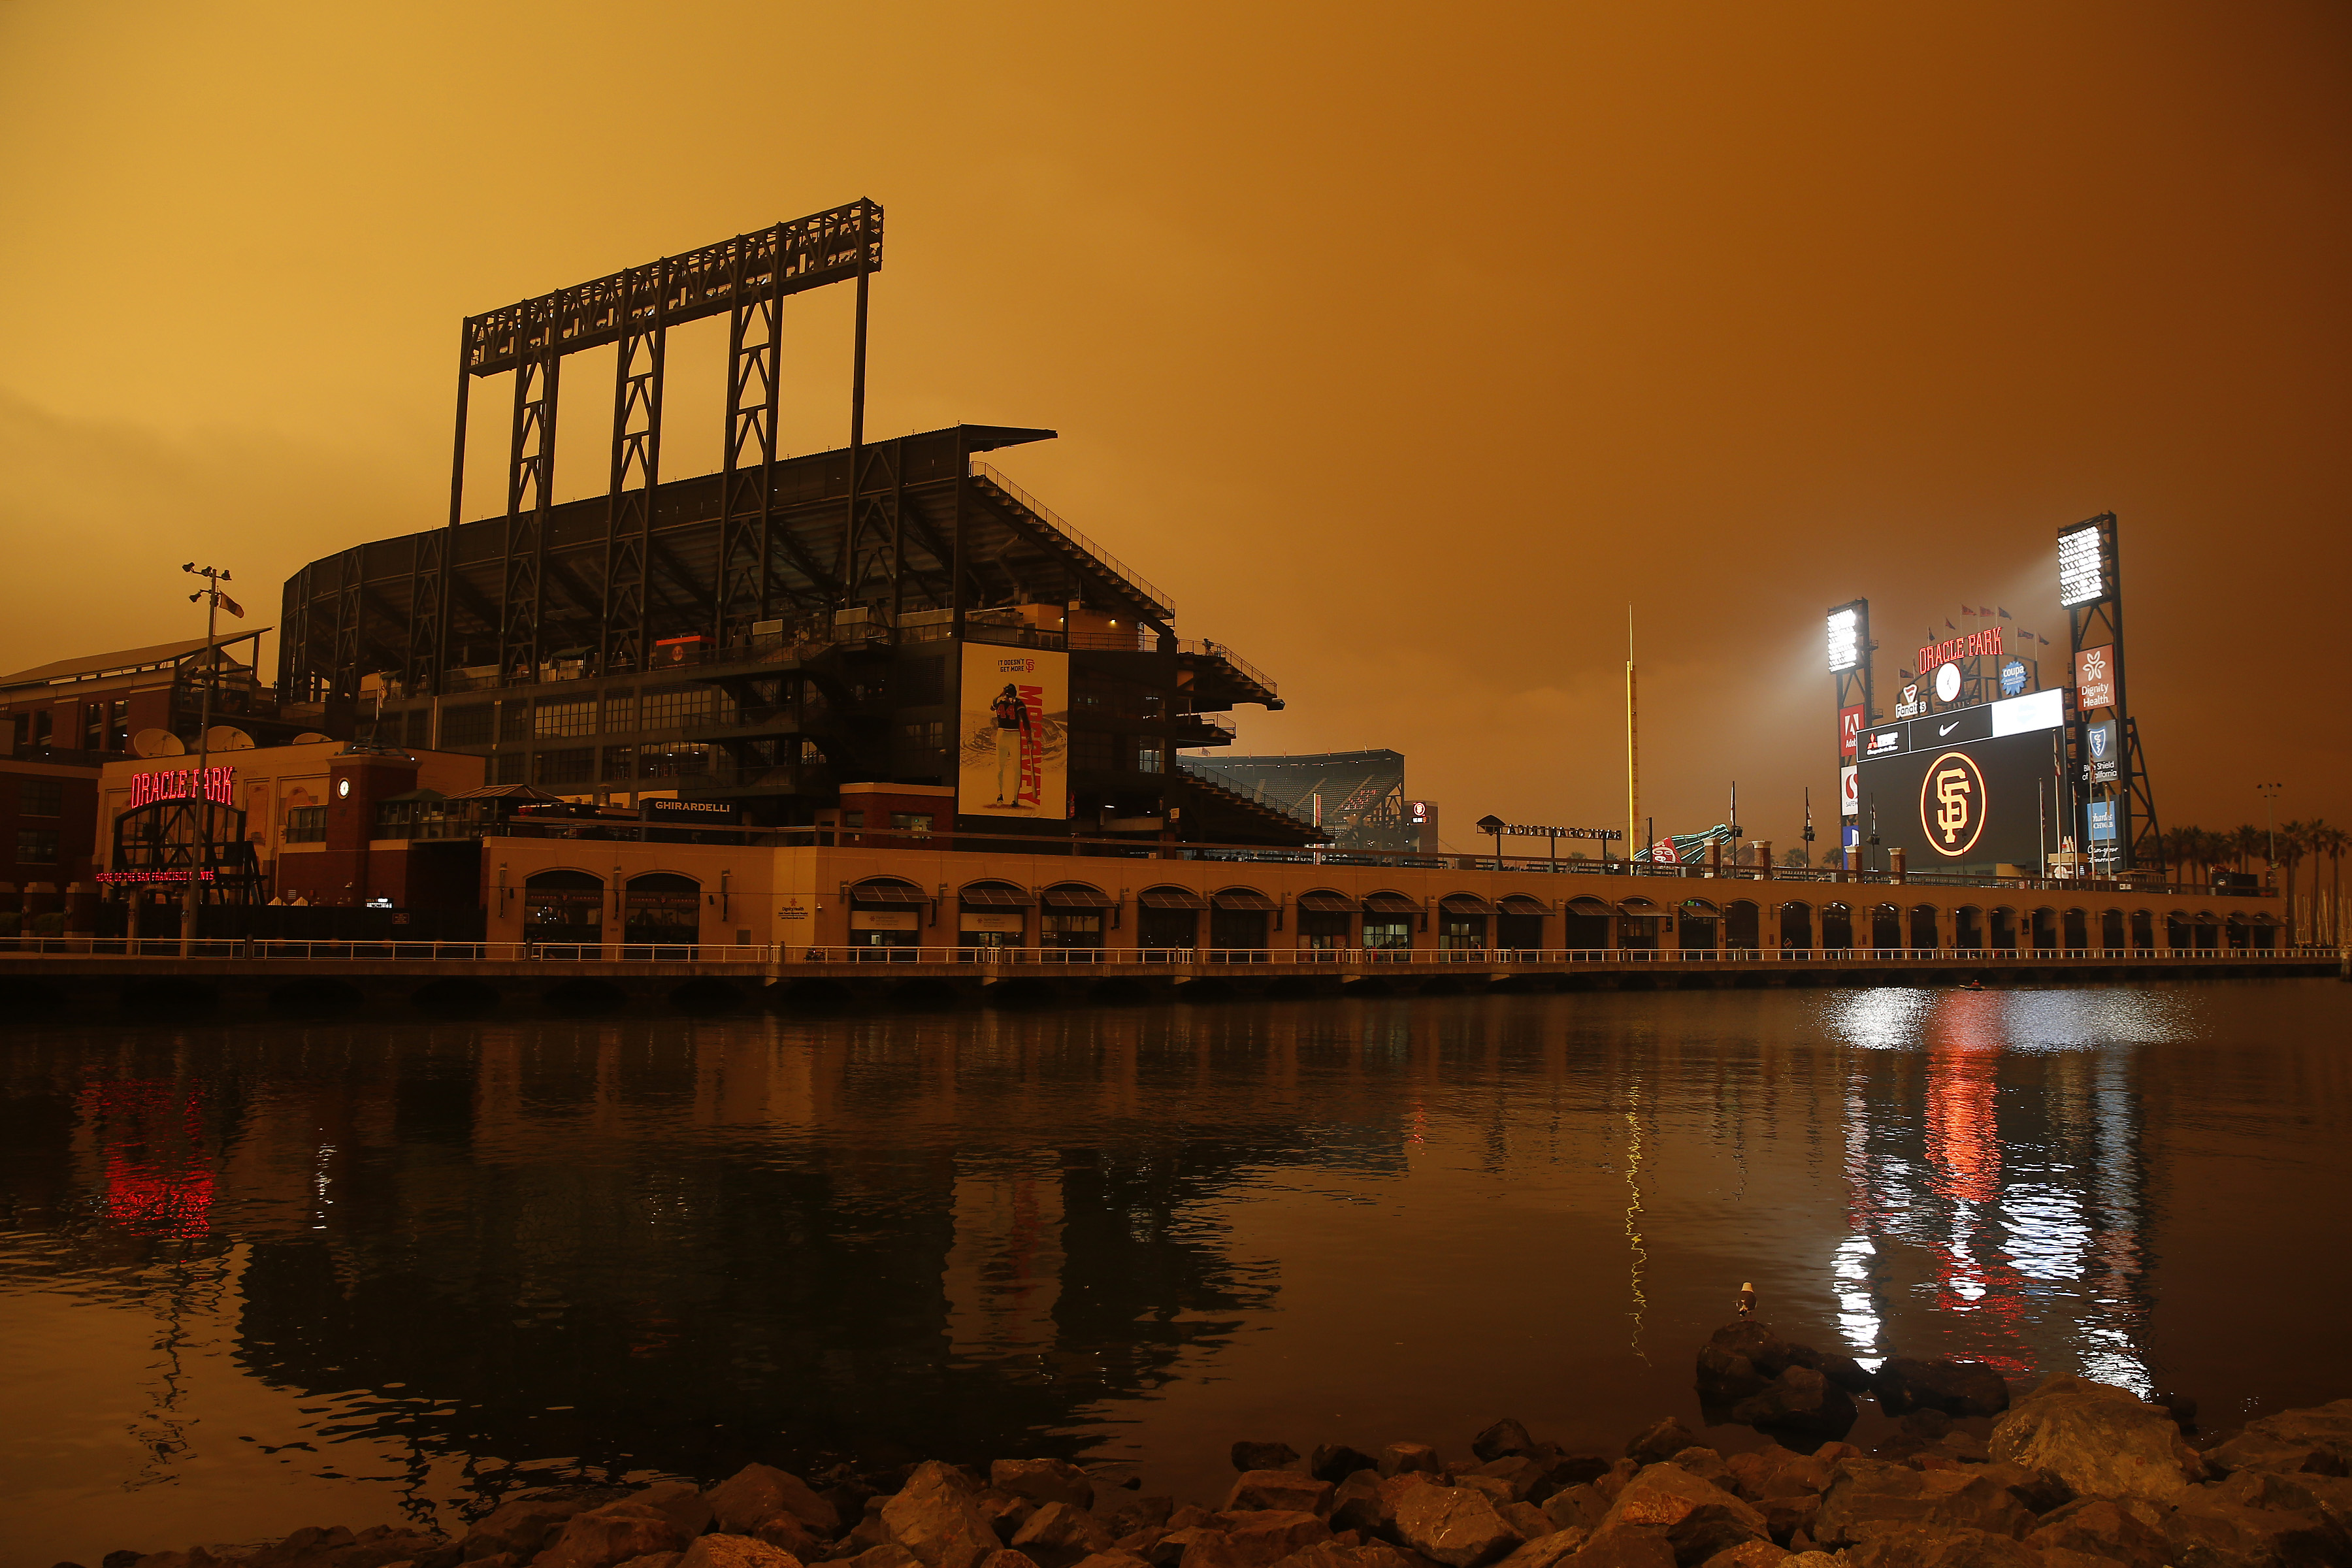 SAN FRANCISCO, CALIFORNIA - SEPTEMBER 09: An exterior view of the ballpark before the game between the San Francisco Giants and the Seattle Mariners at Oracle Park on September 09, 2020 in San Francisco, California. Smoke from various wildfires burning across Northern California has blanketed the city in an orange glow. (Photo by Lachlan Cunningham/Getty Images)